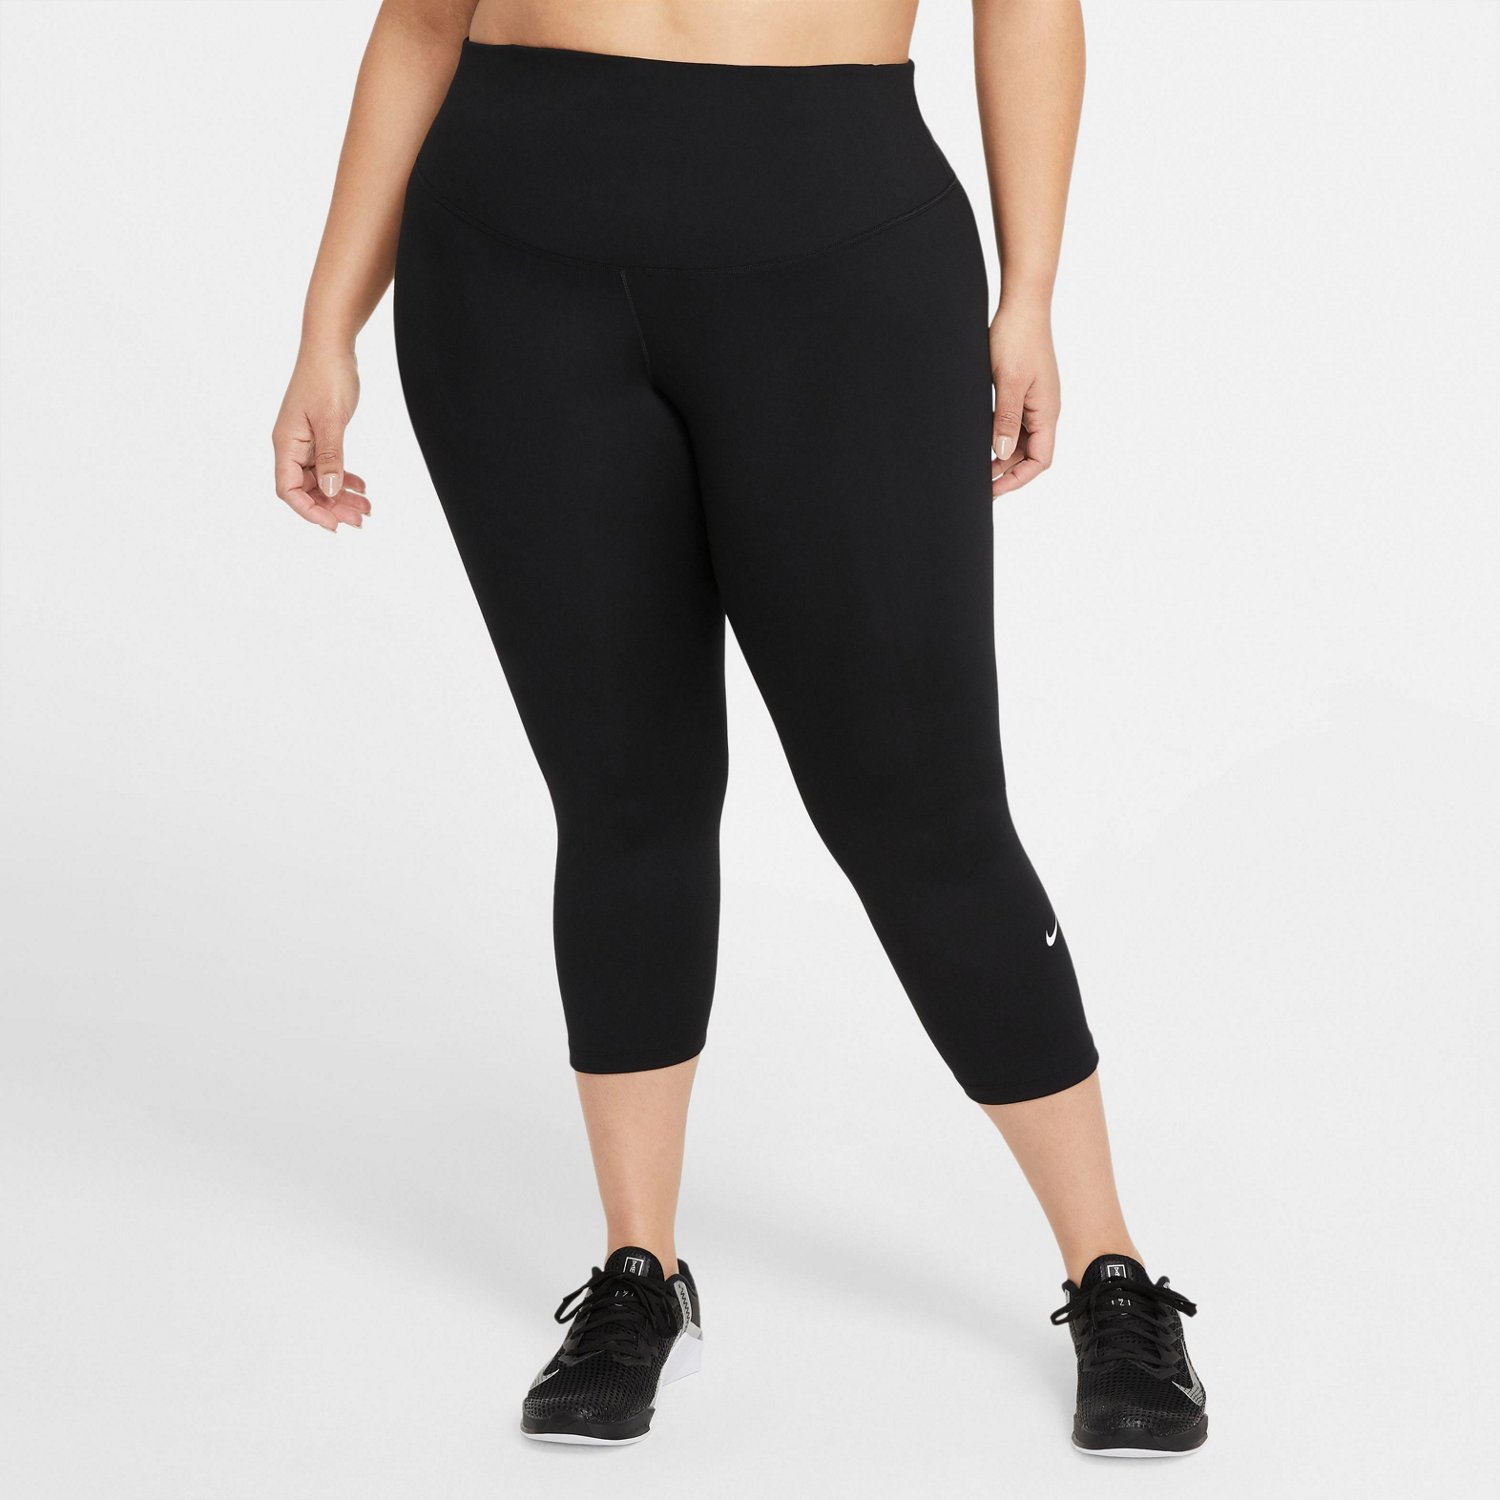 Nike Women's One Cropped 2.0 Plus Size Tights